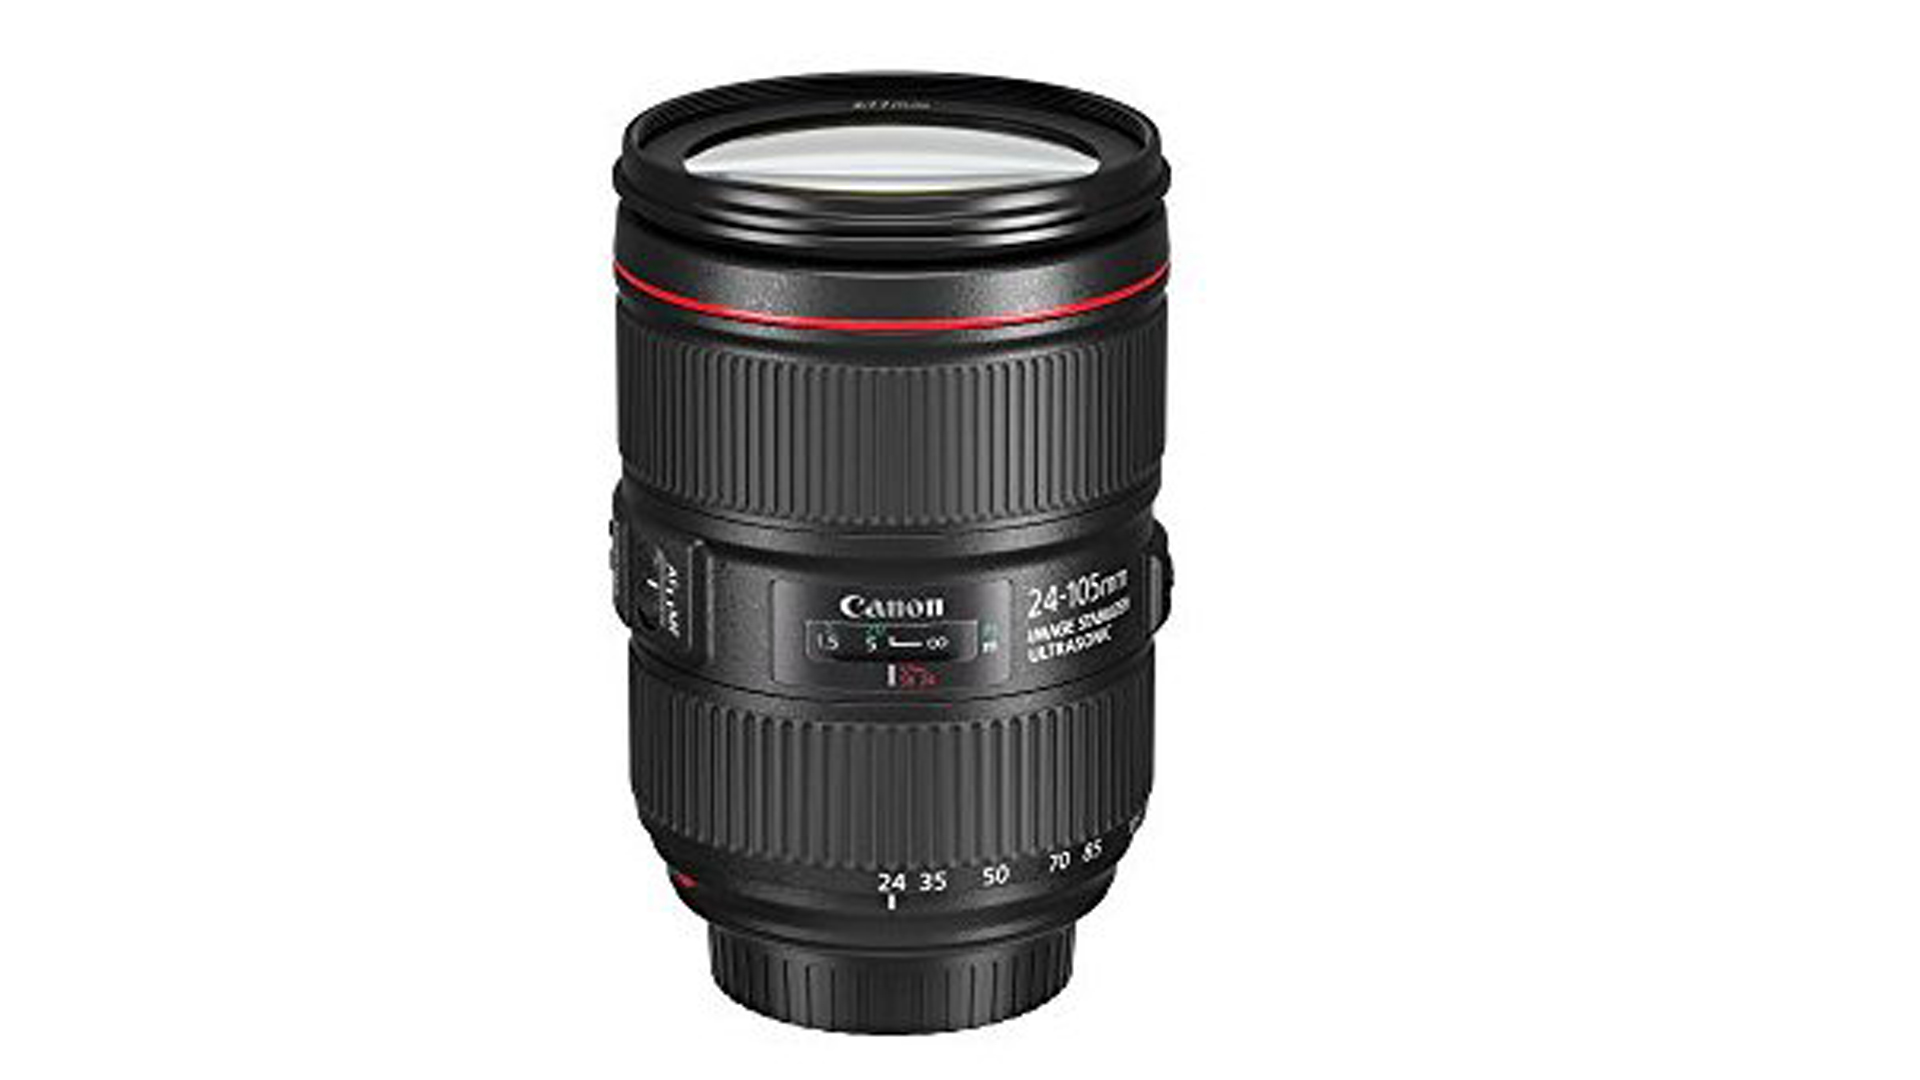 Canon EF 24-105mm  f/4L  Is USM